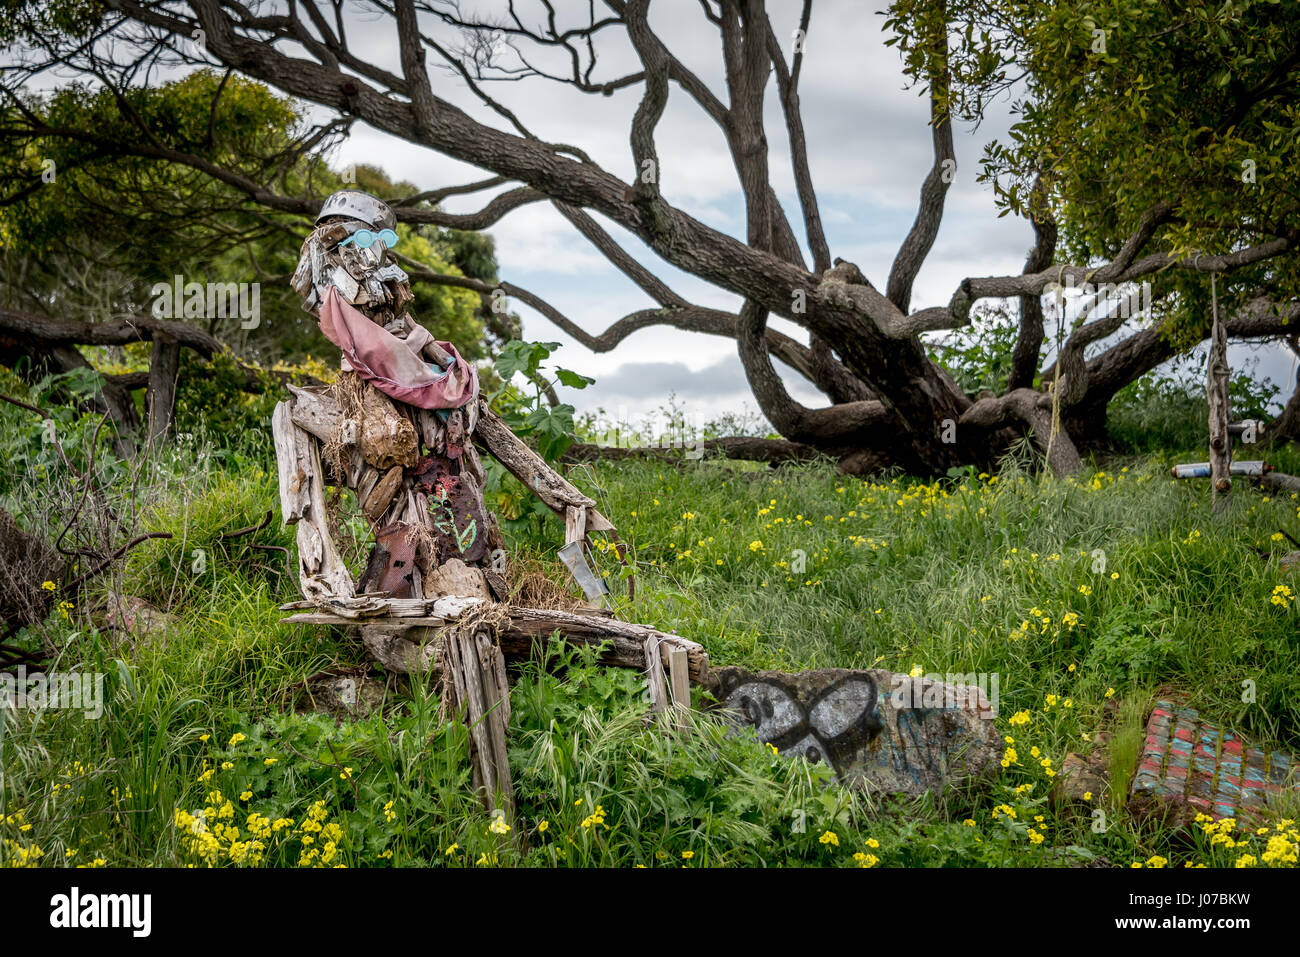 A driftwood sculpture of a man seated beneath a tree with grass and wildflowers surrounding him at Albany Bulb on San Francisco Bay. Stock Photo